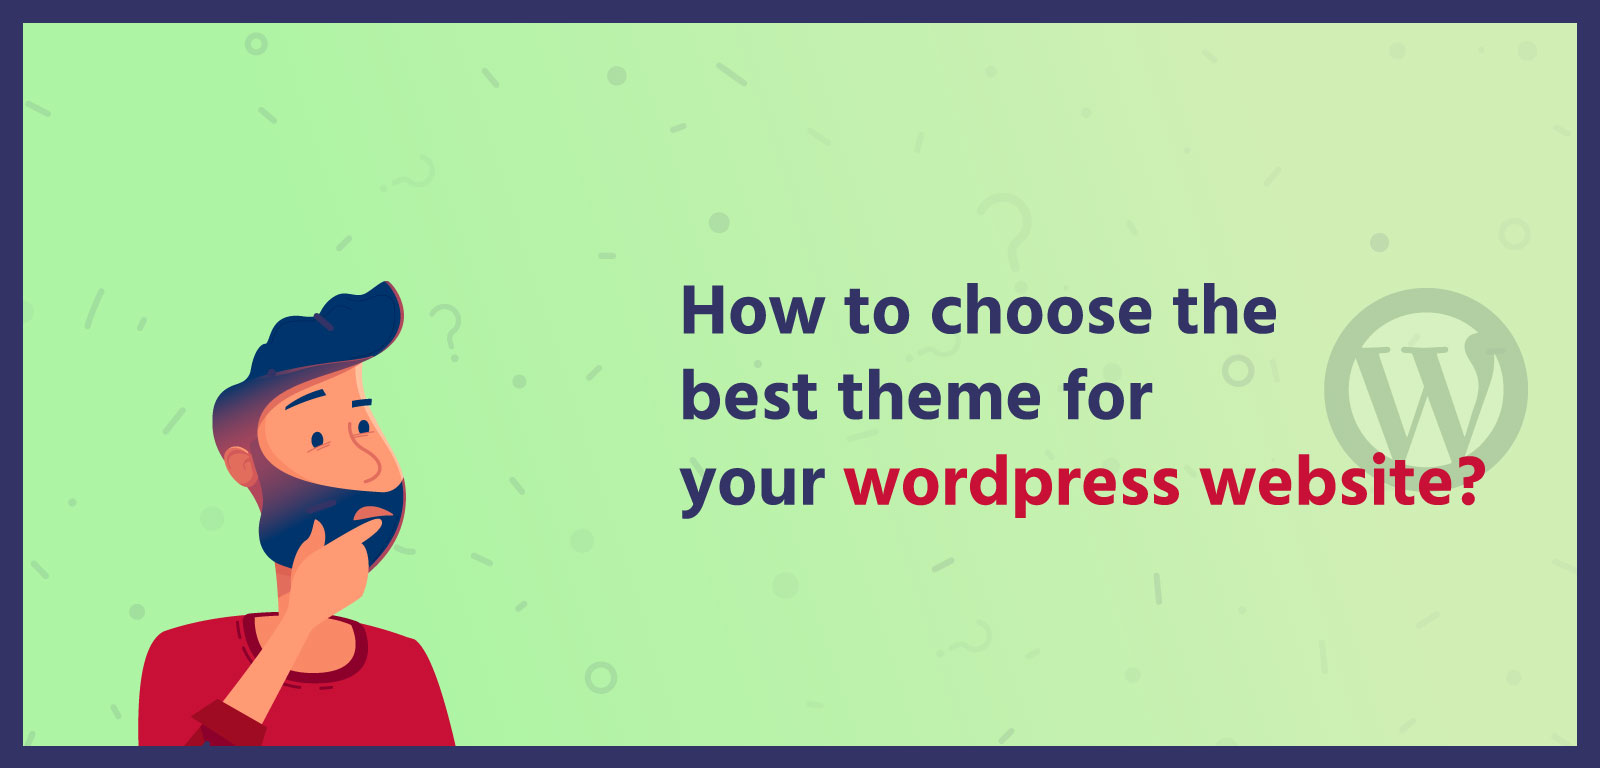 How to choose the best theme for your wordpress website?